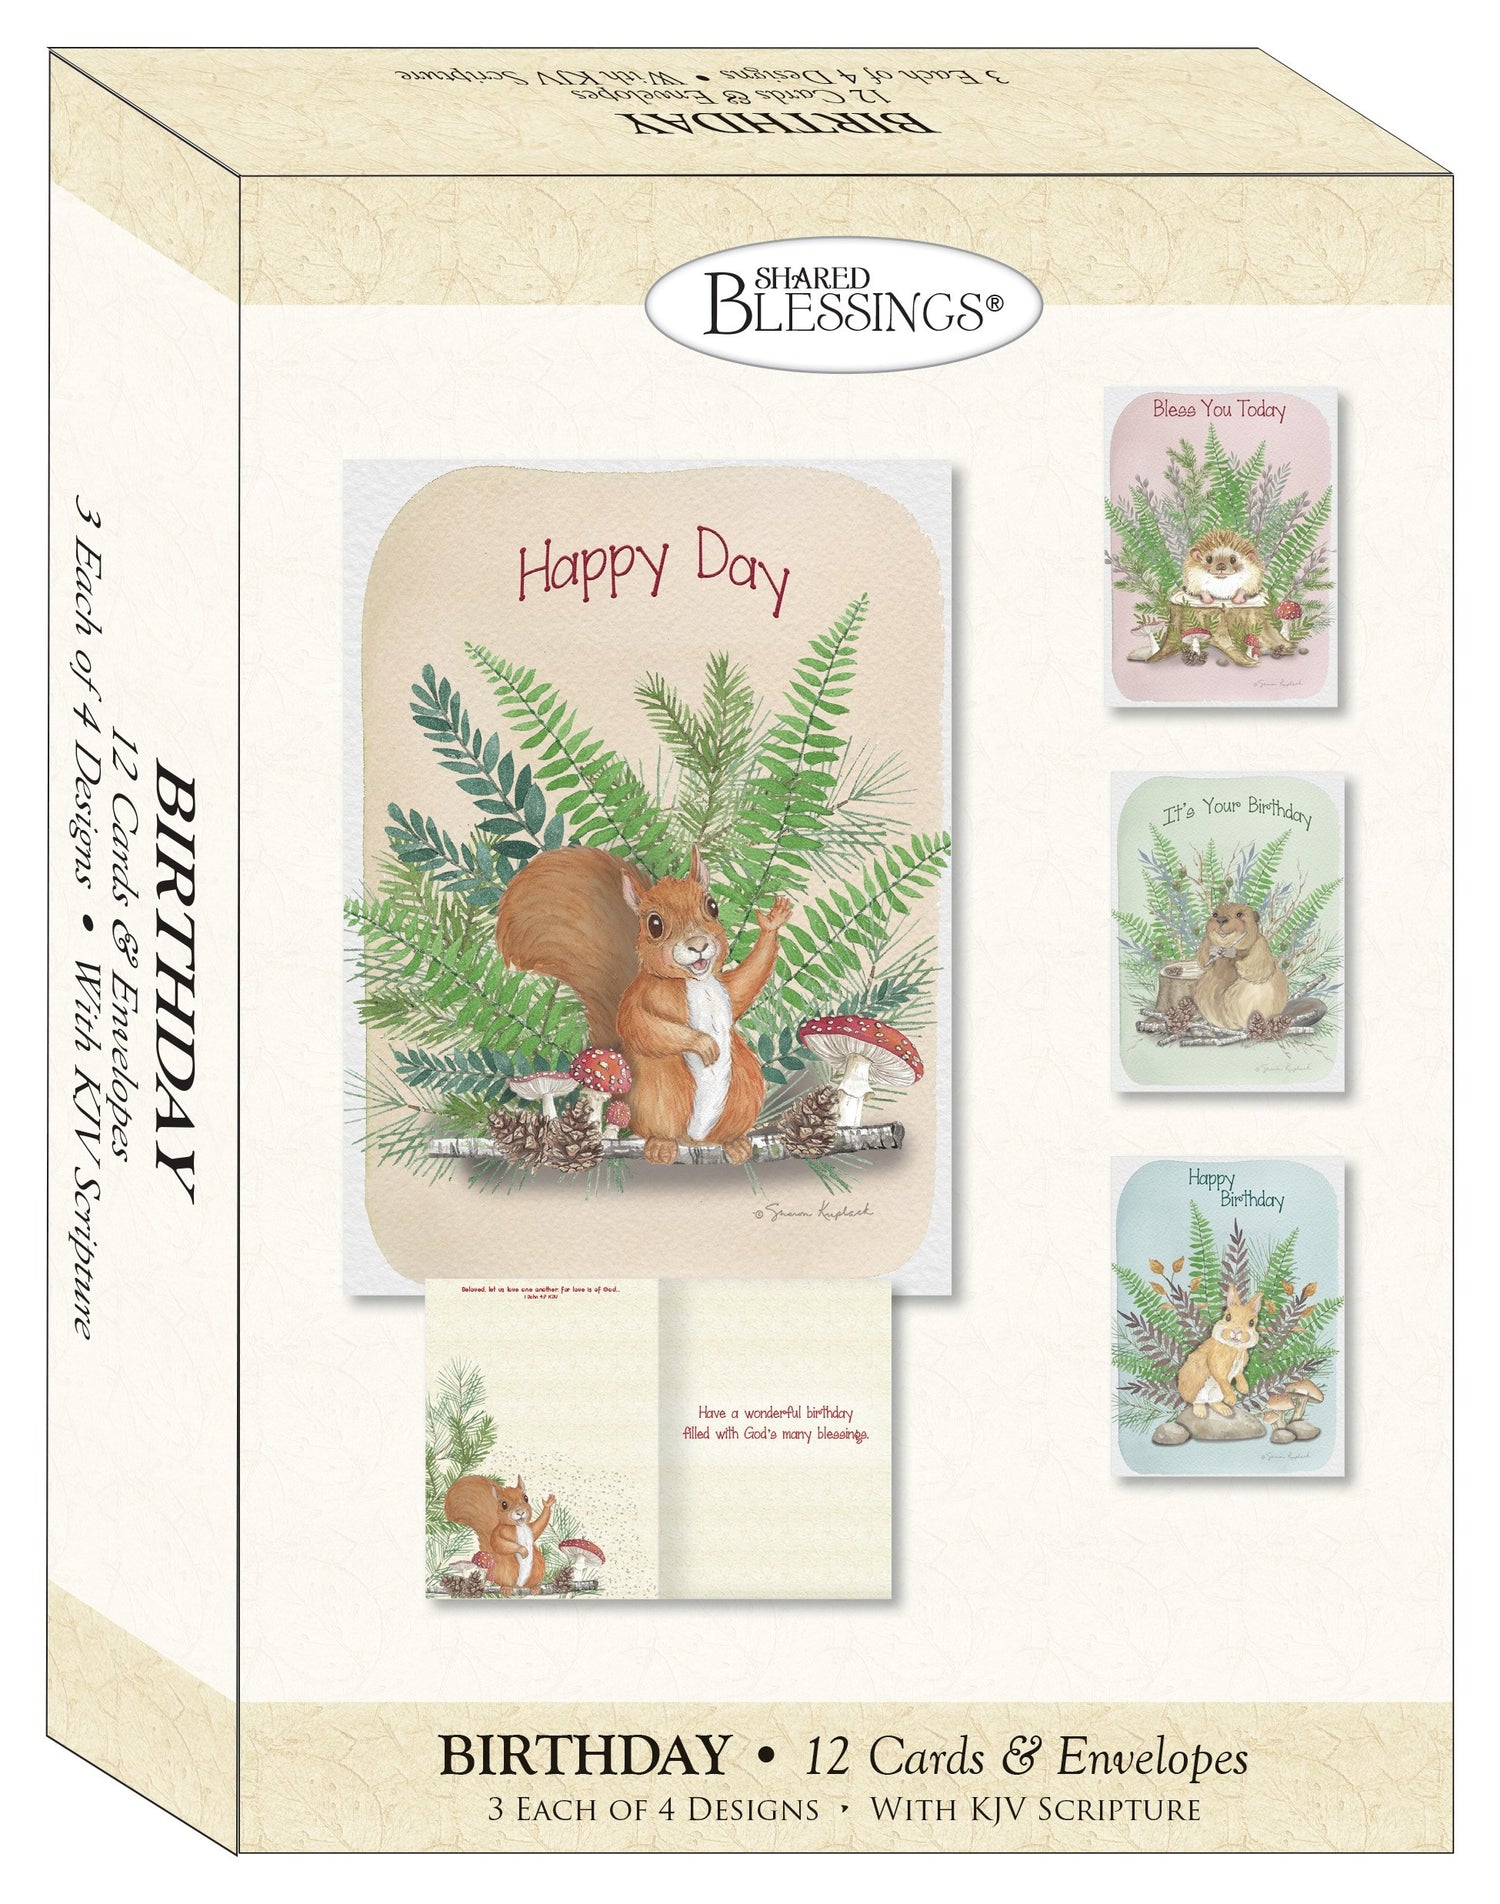 Seed of Abraham Christian Bookstore - (In)Courage - Card-Boxed-Shared Blessings-Childrens Birthday-Woodland Critters (Box Of 12)